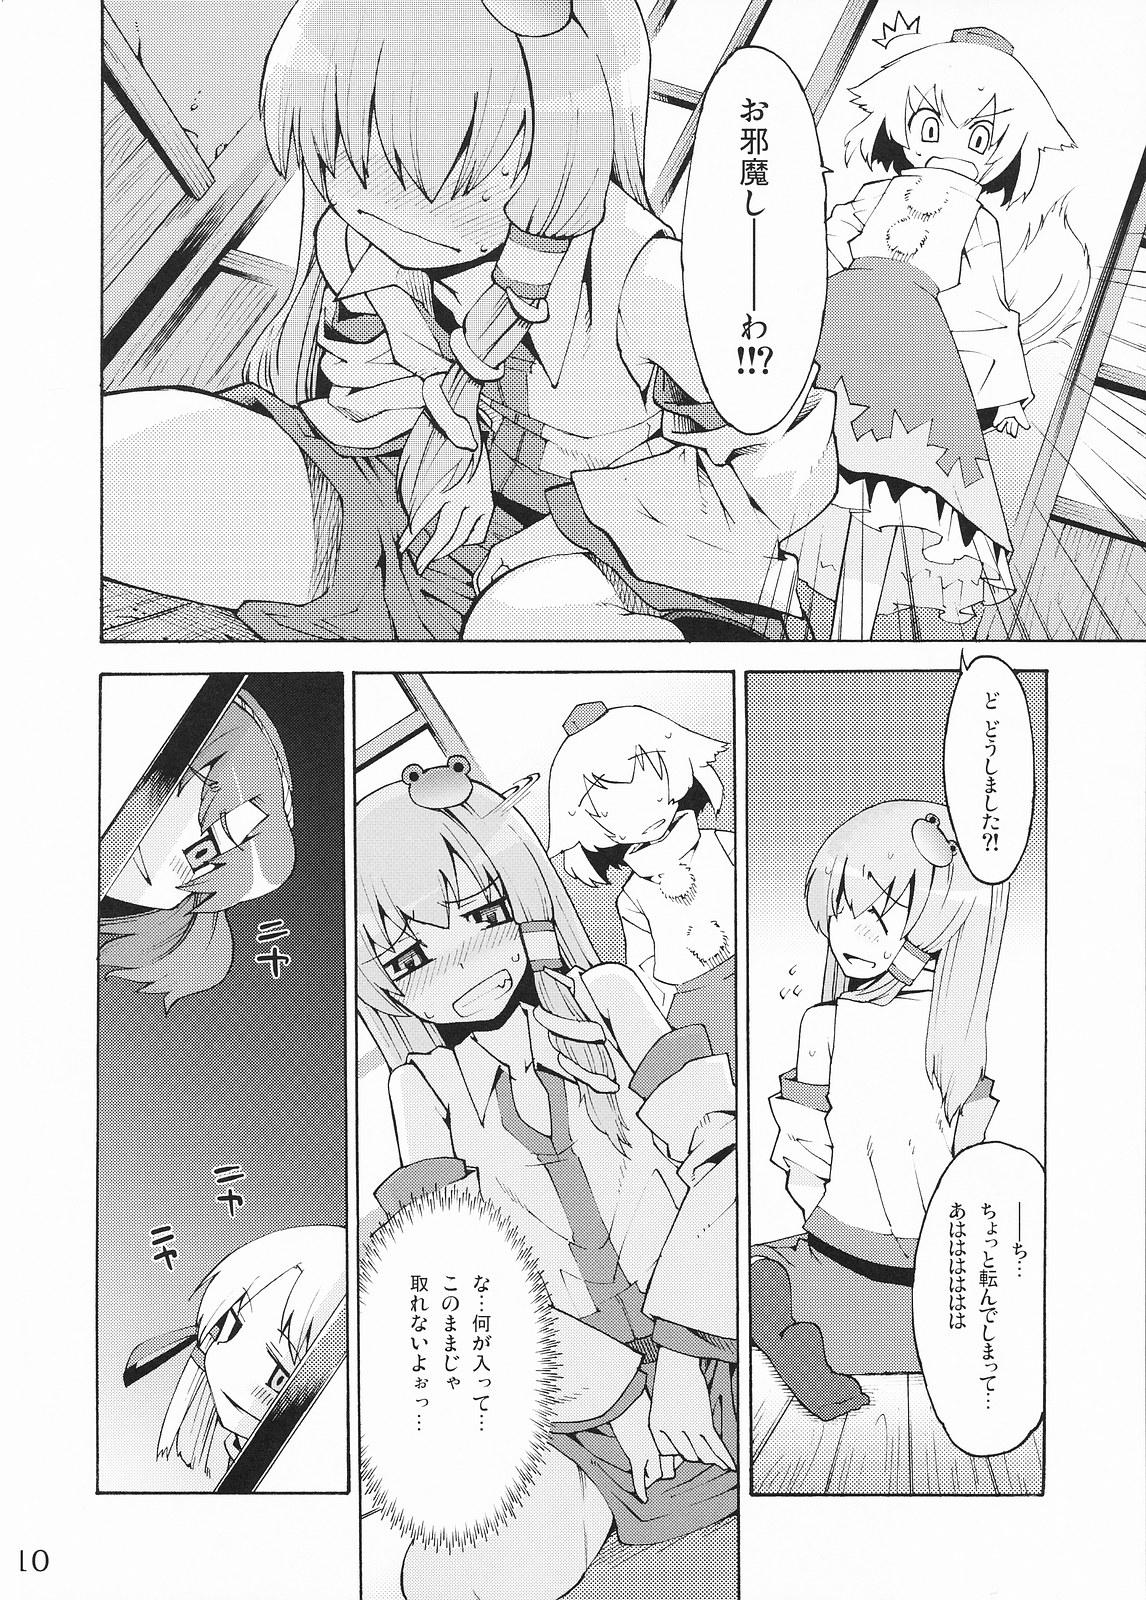 Horny Kami-sama to Issho! Happy every day! - Touhou project Sister - Page 10